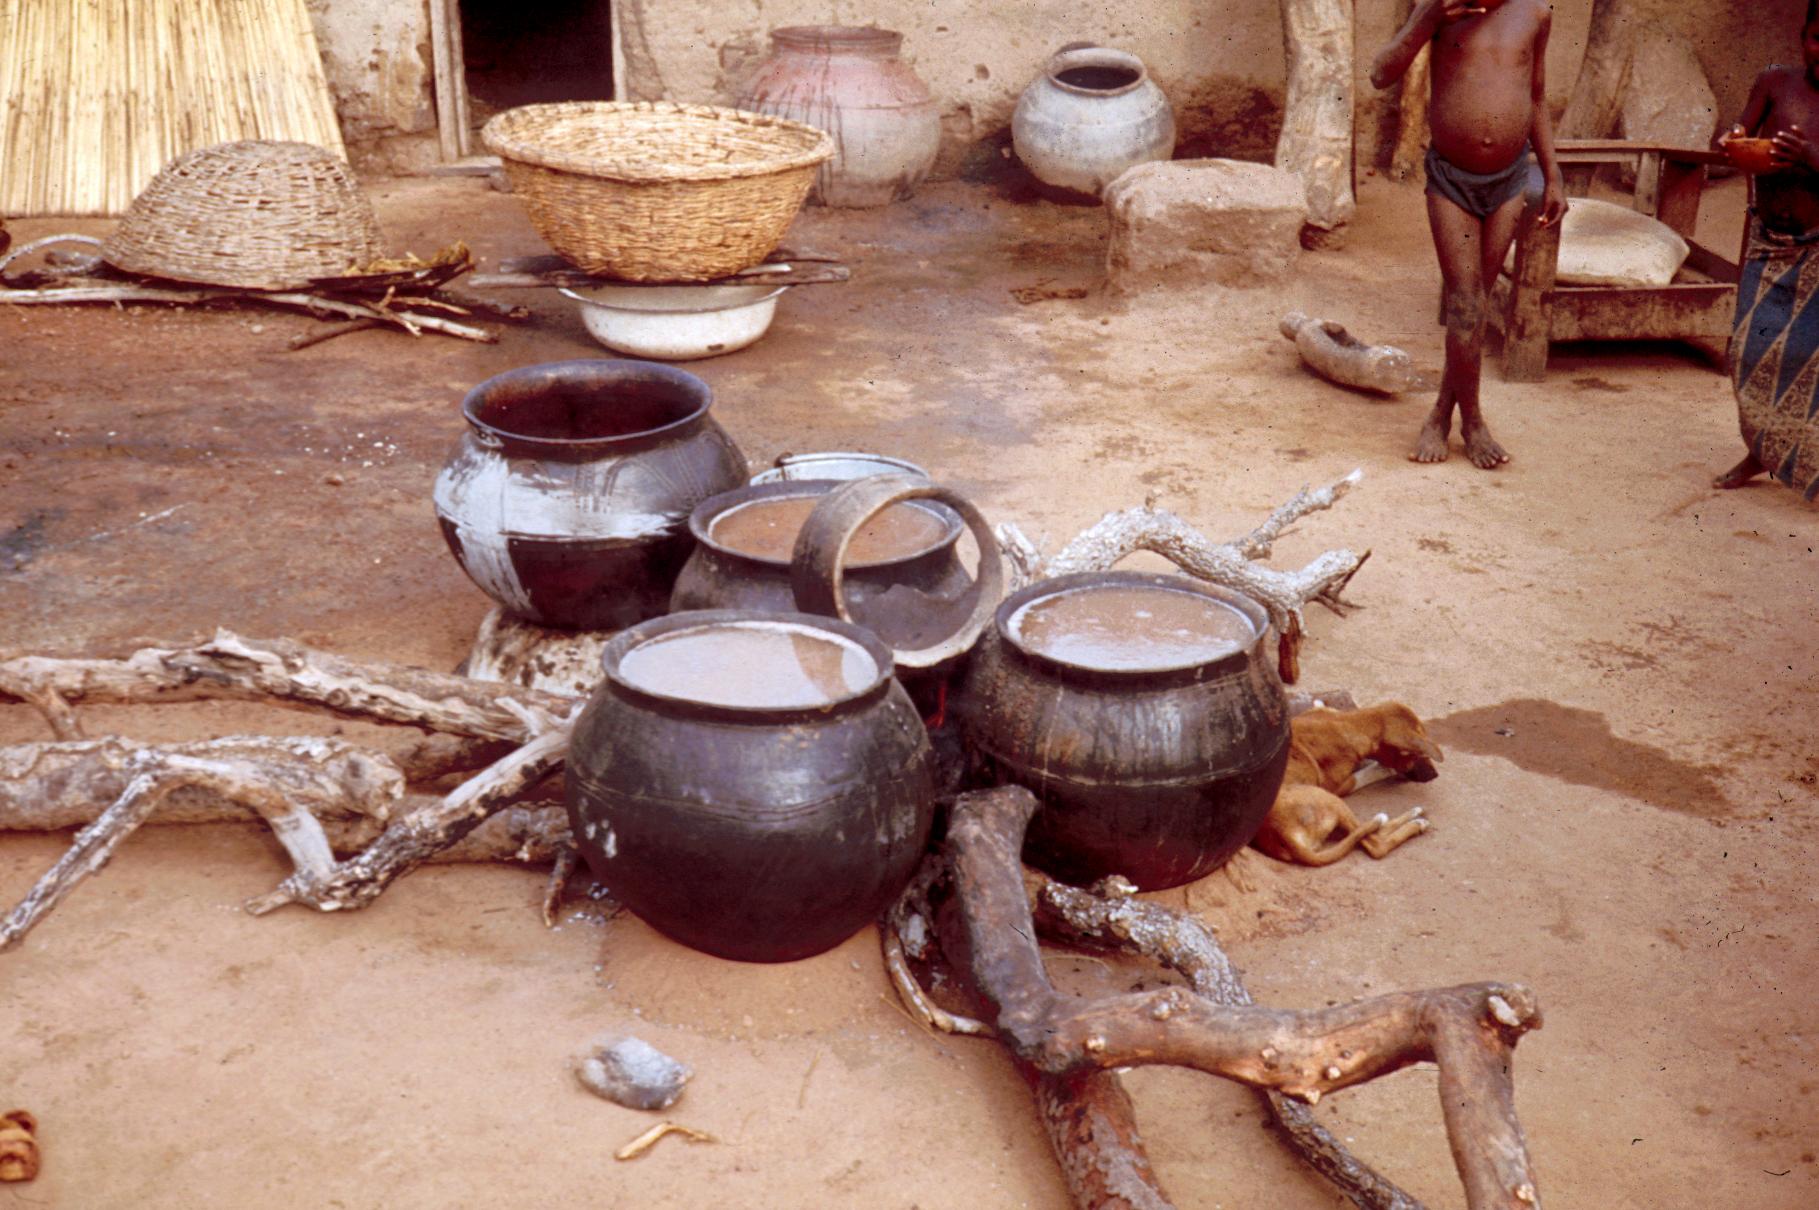 Brewing Beer in a Compound in Bujan, Sisalaland